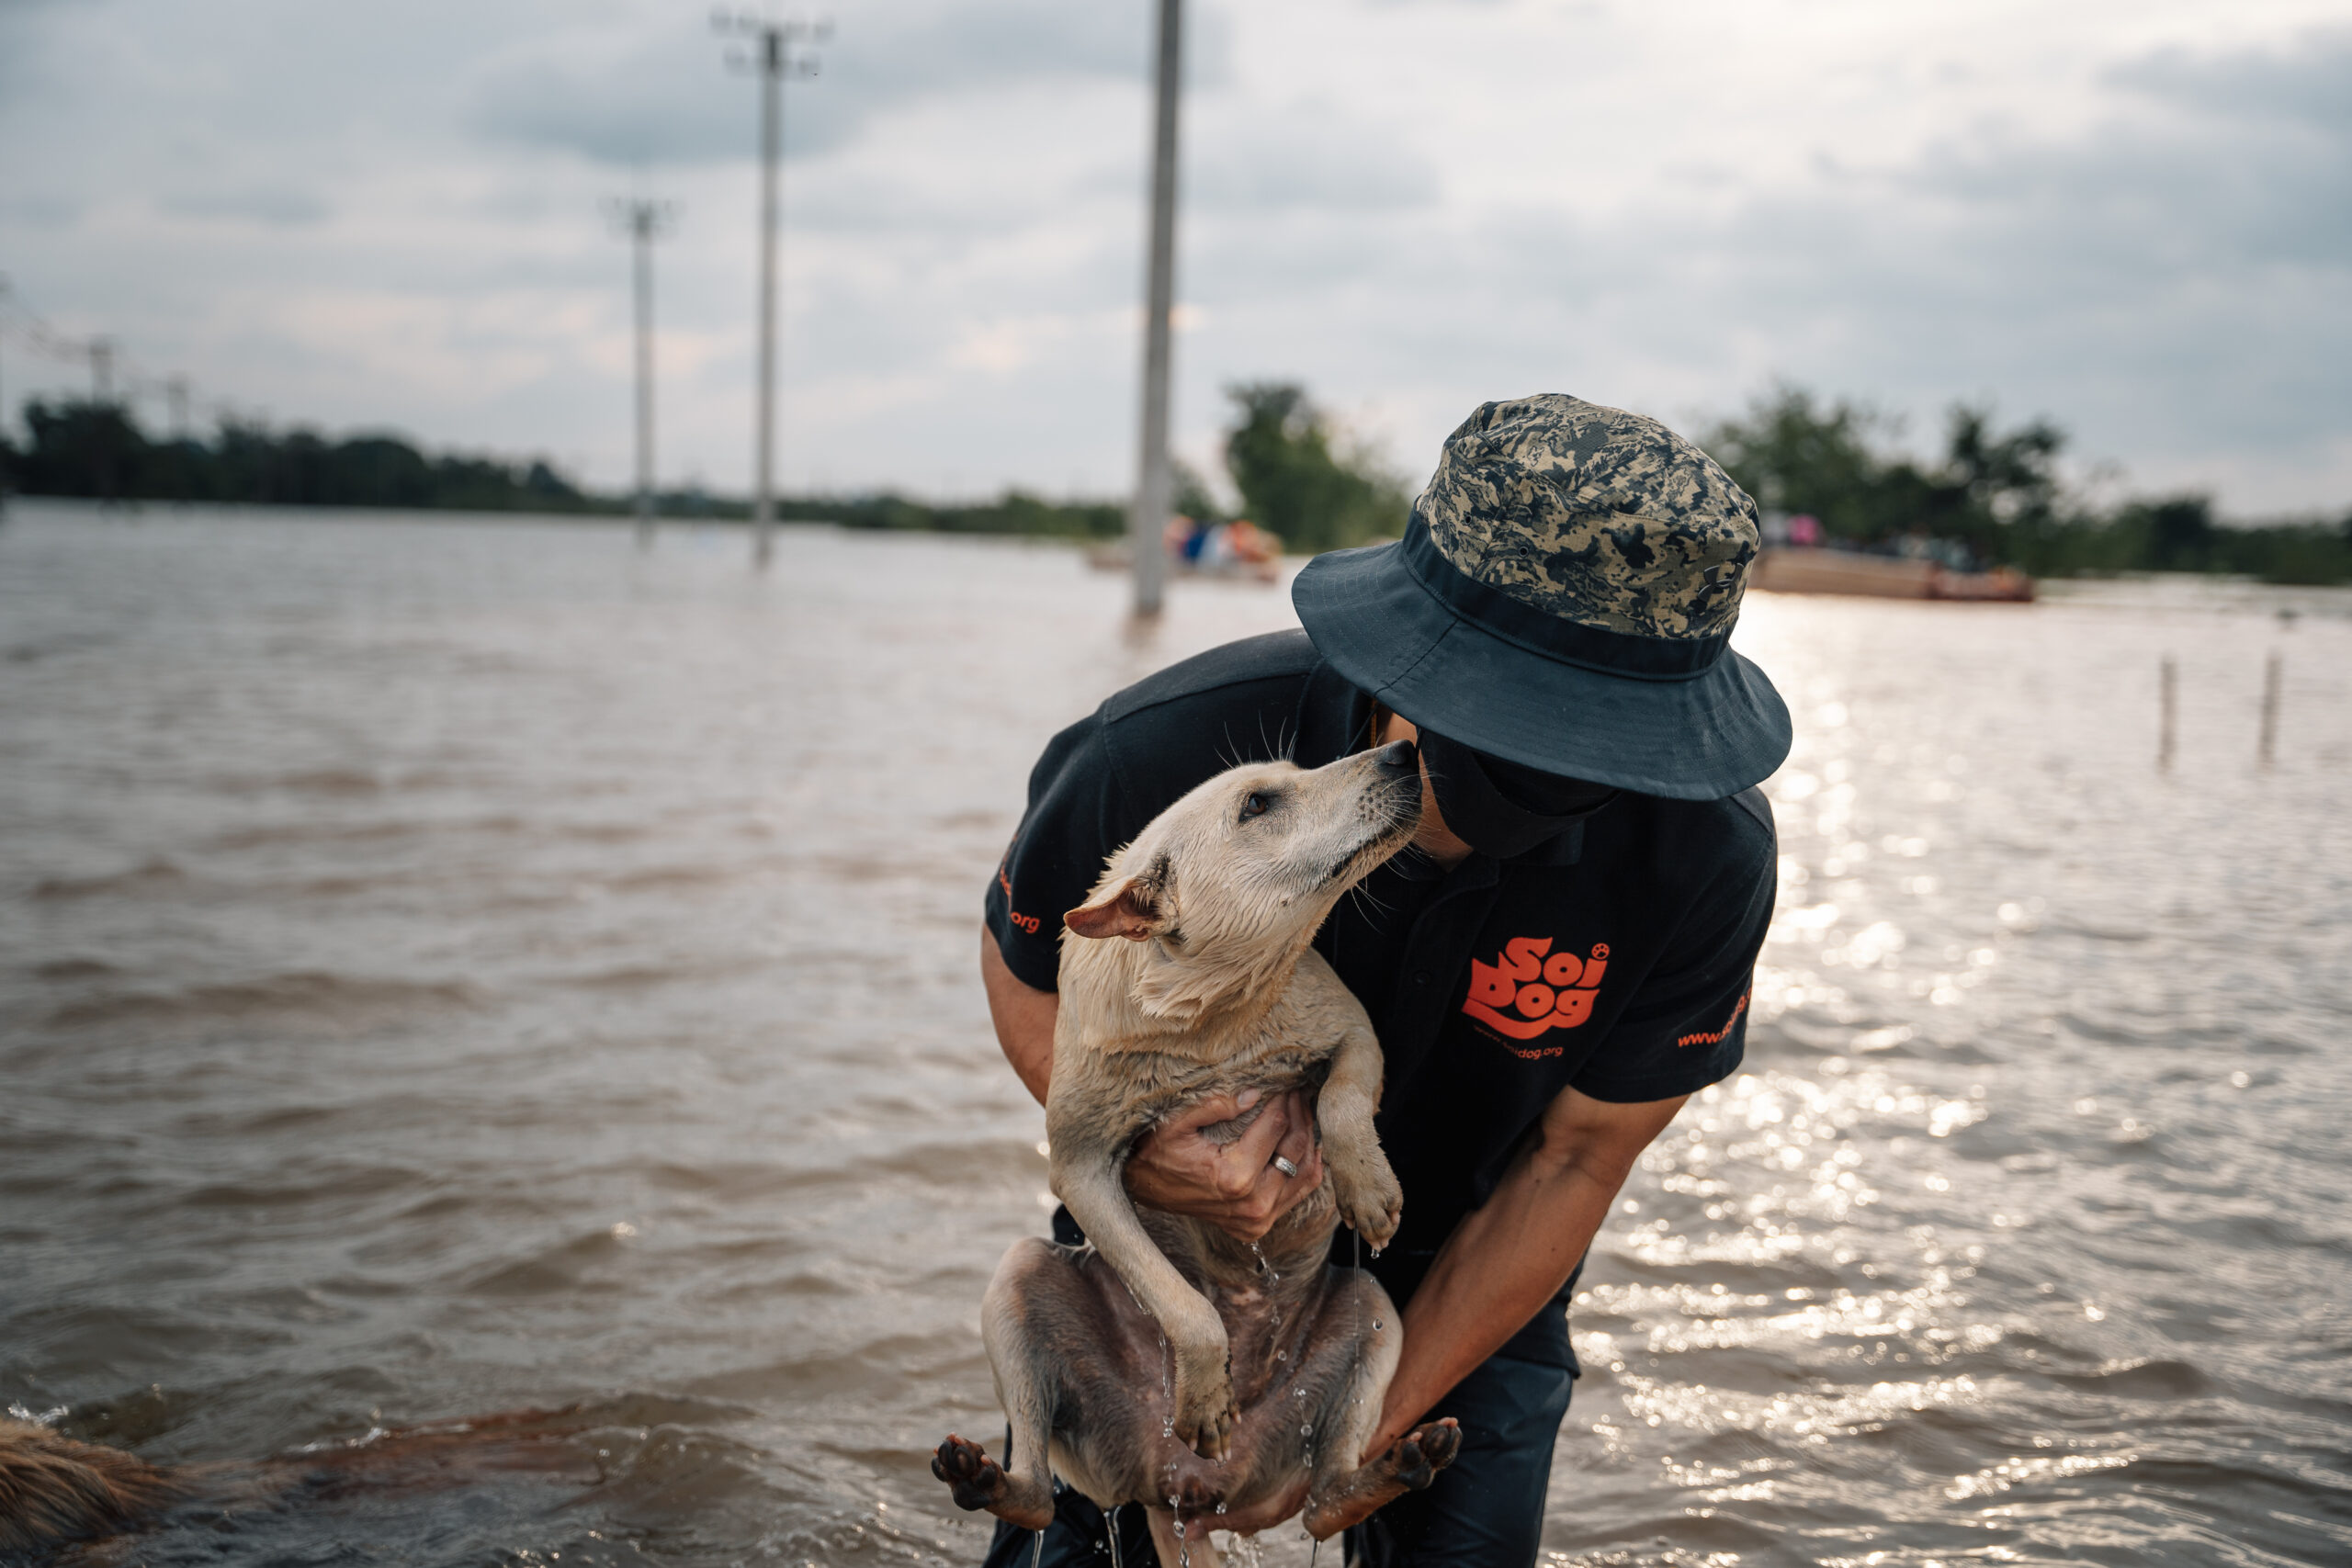 Soi Dog assists in the distribution of food and the rescue of some animals.